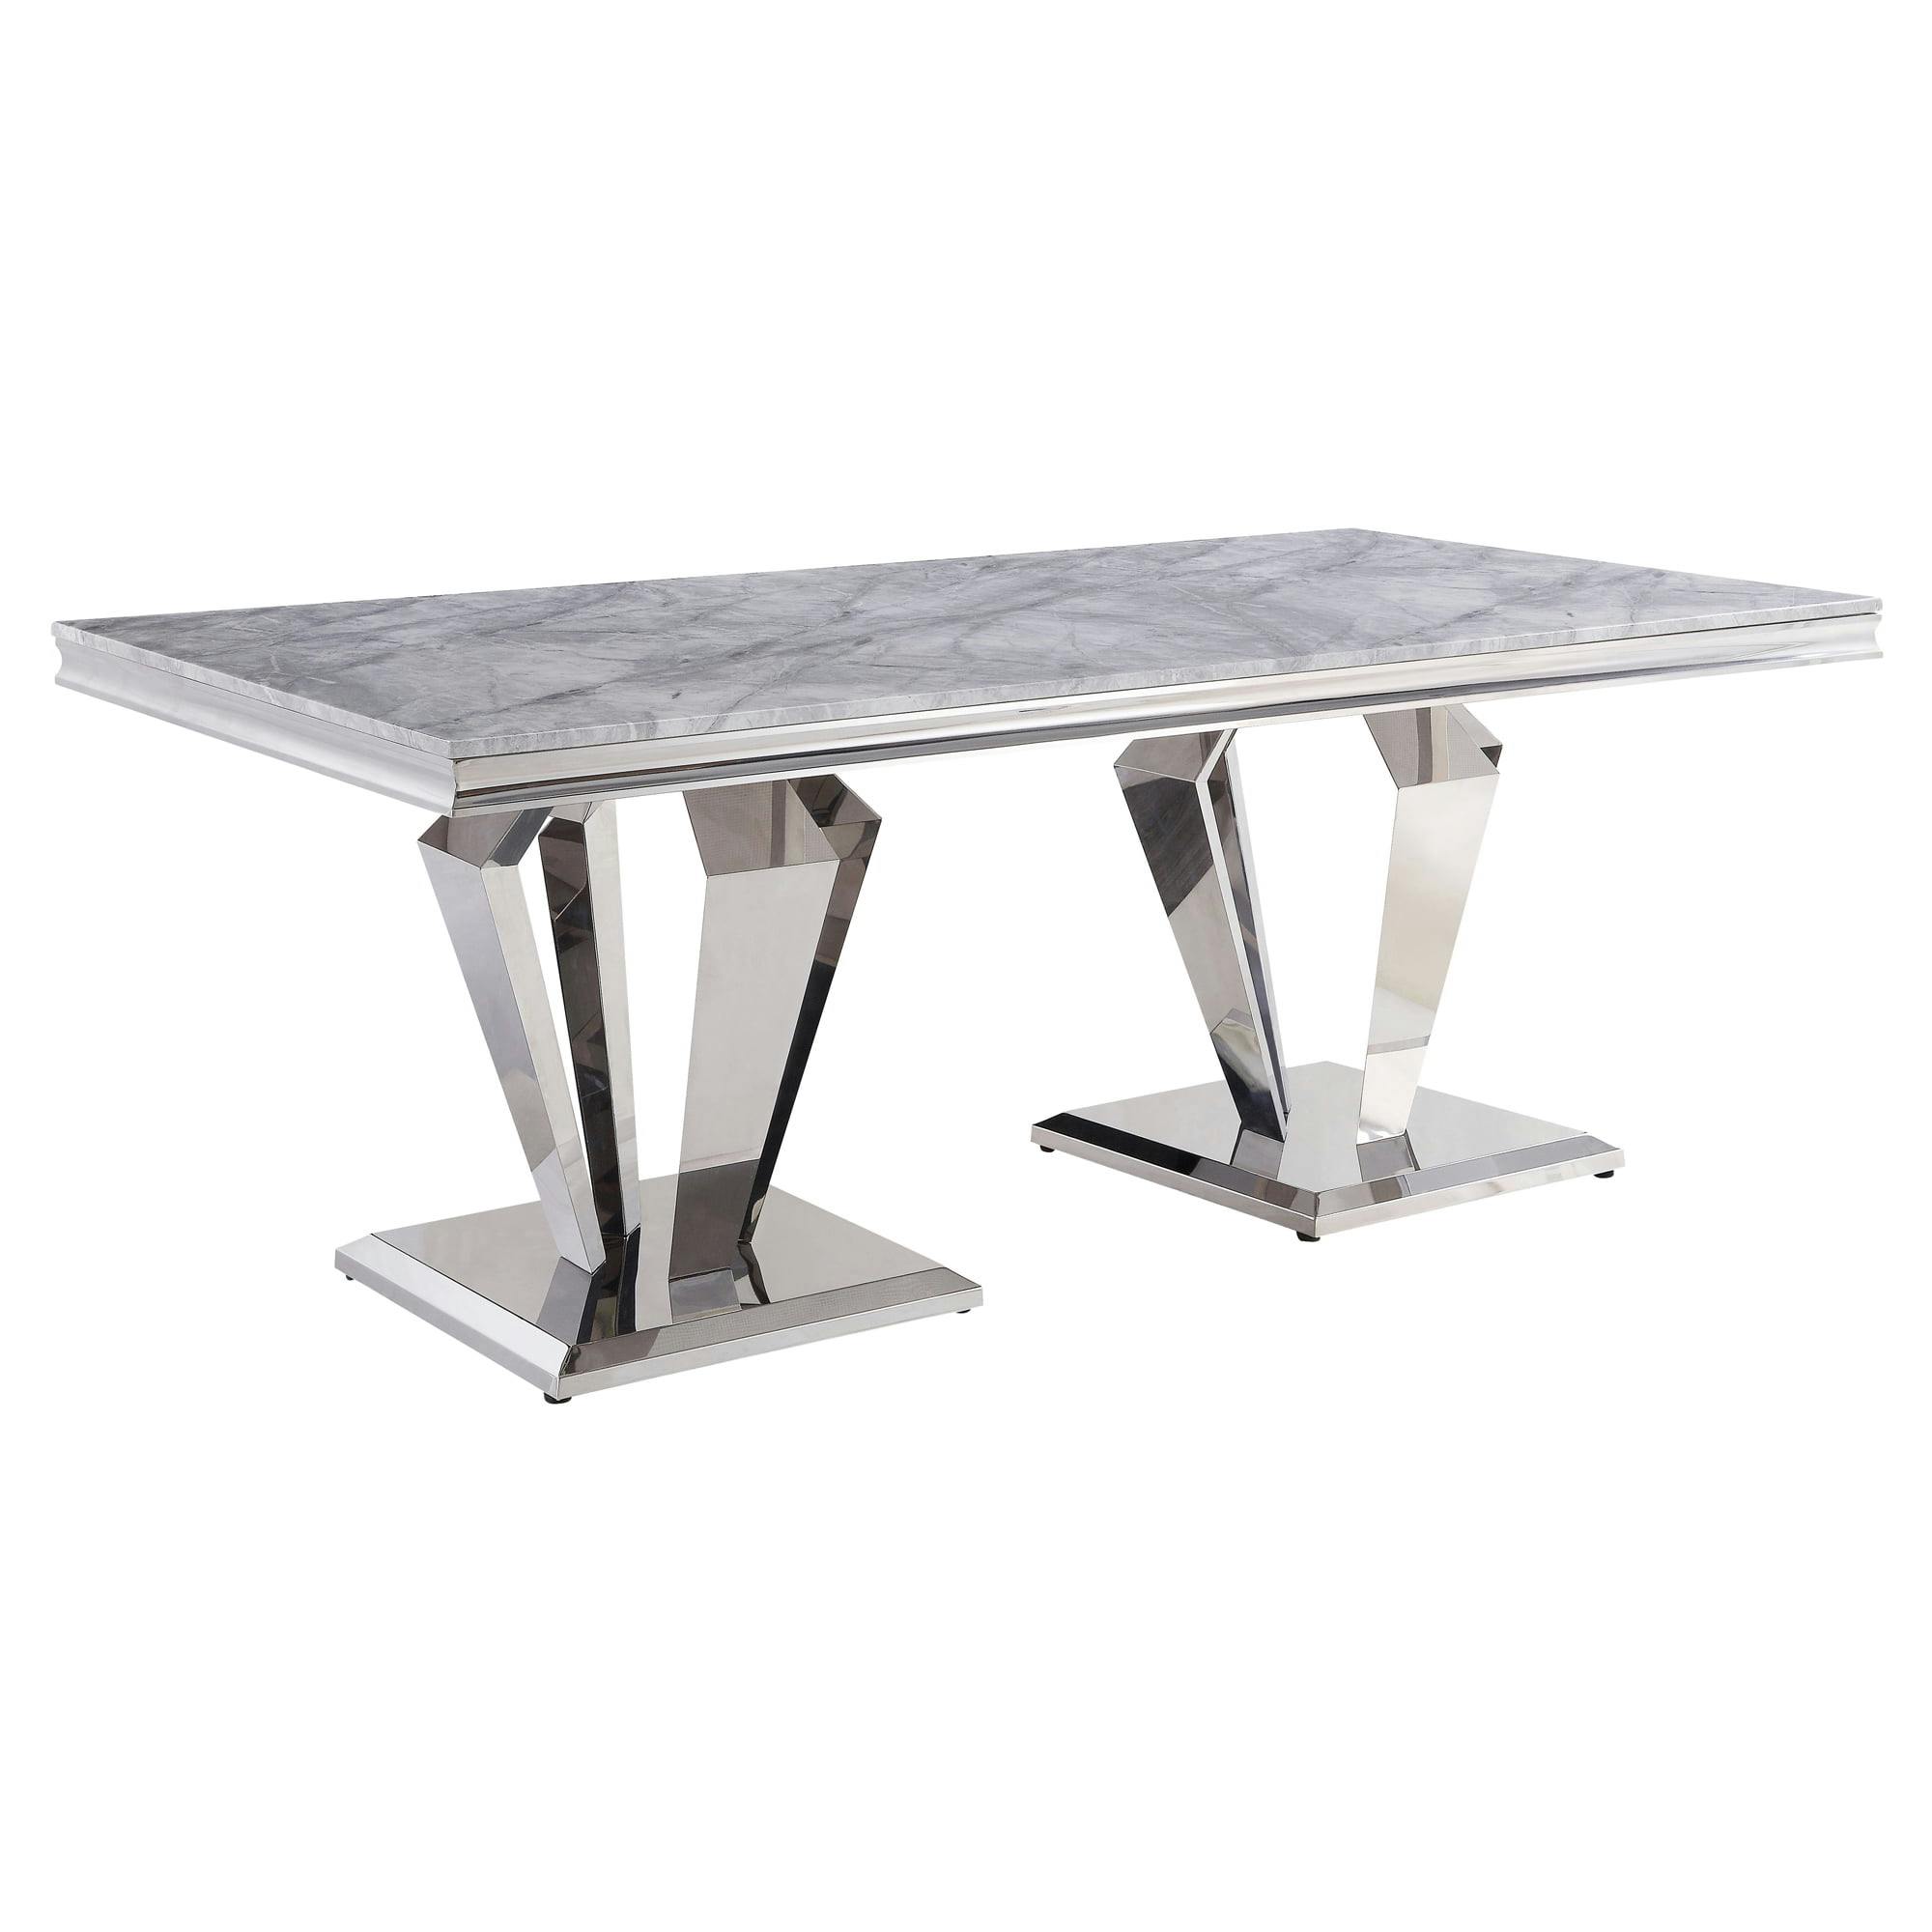 Satinka 79" Light Gray Faux Marble Dining Table with Mirrored Silver Base